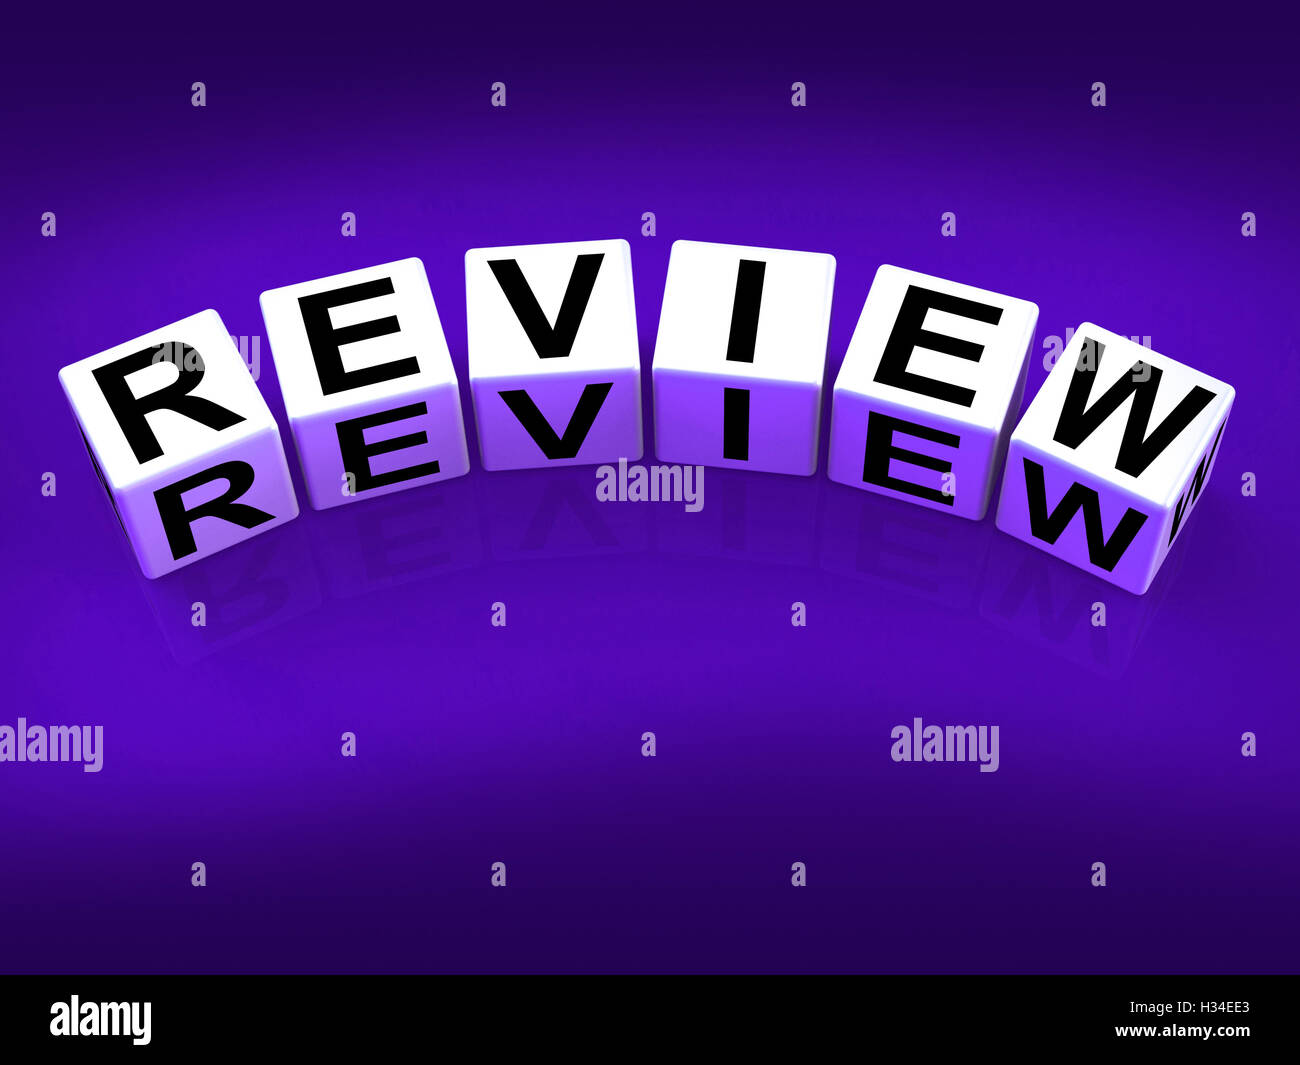 Review Blocks Mean Evaluating Assessing and Reviewing Stock Photo